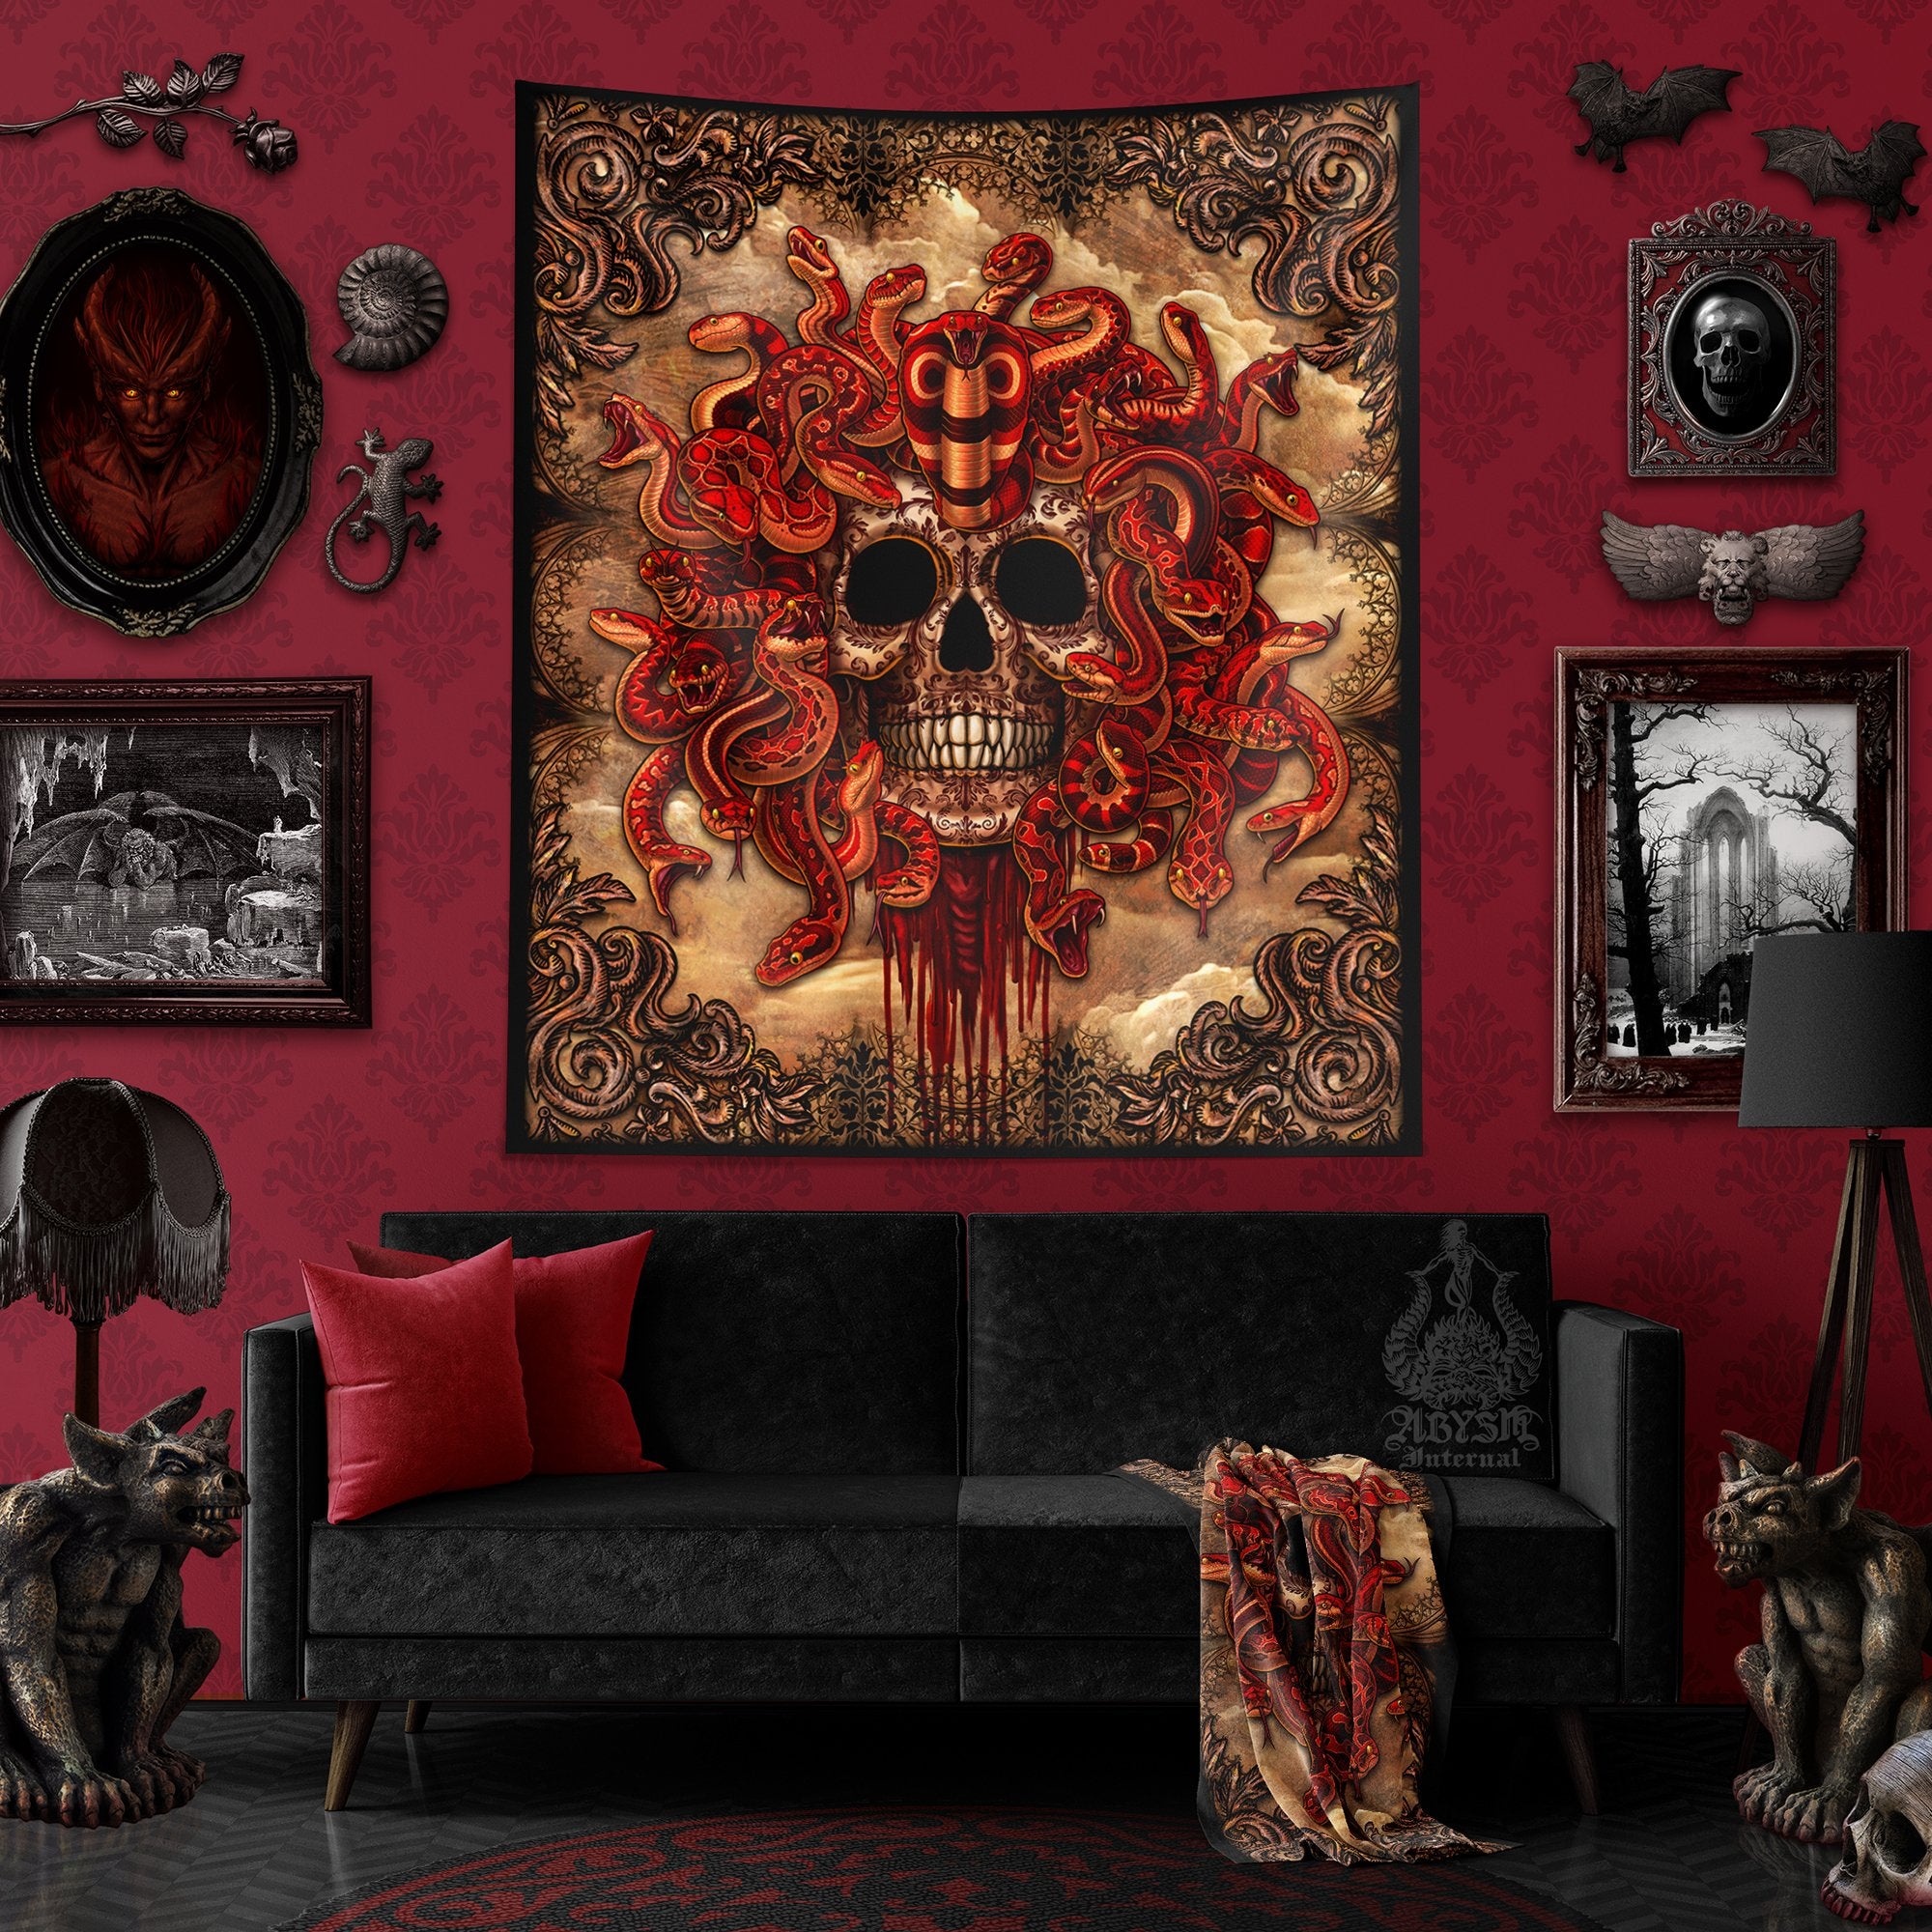 Skull Gothic Satanic Fly Large Wall Tapestry-skull Wall Decor-goth Satanic  Wall Decor-gothic Decor 